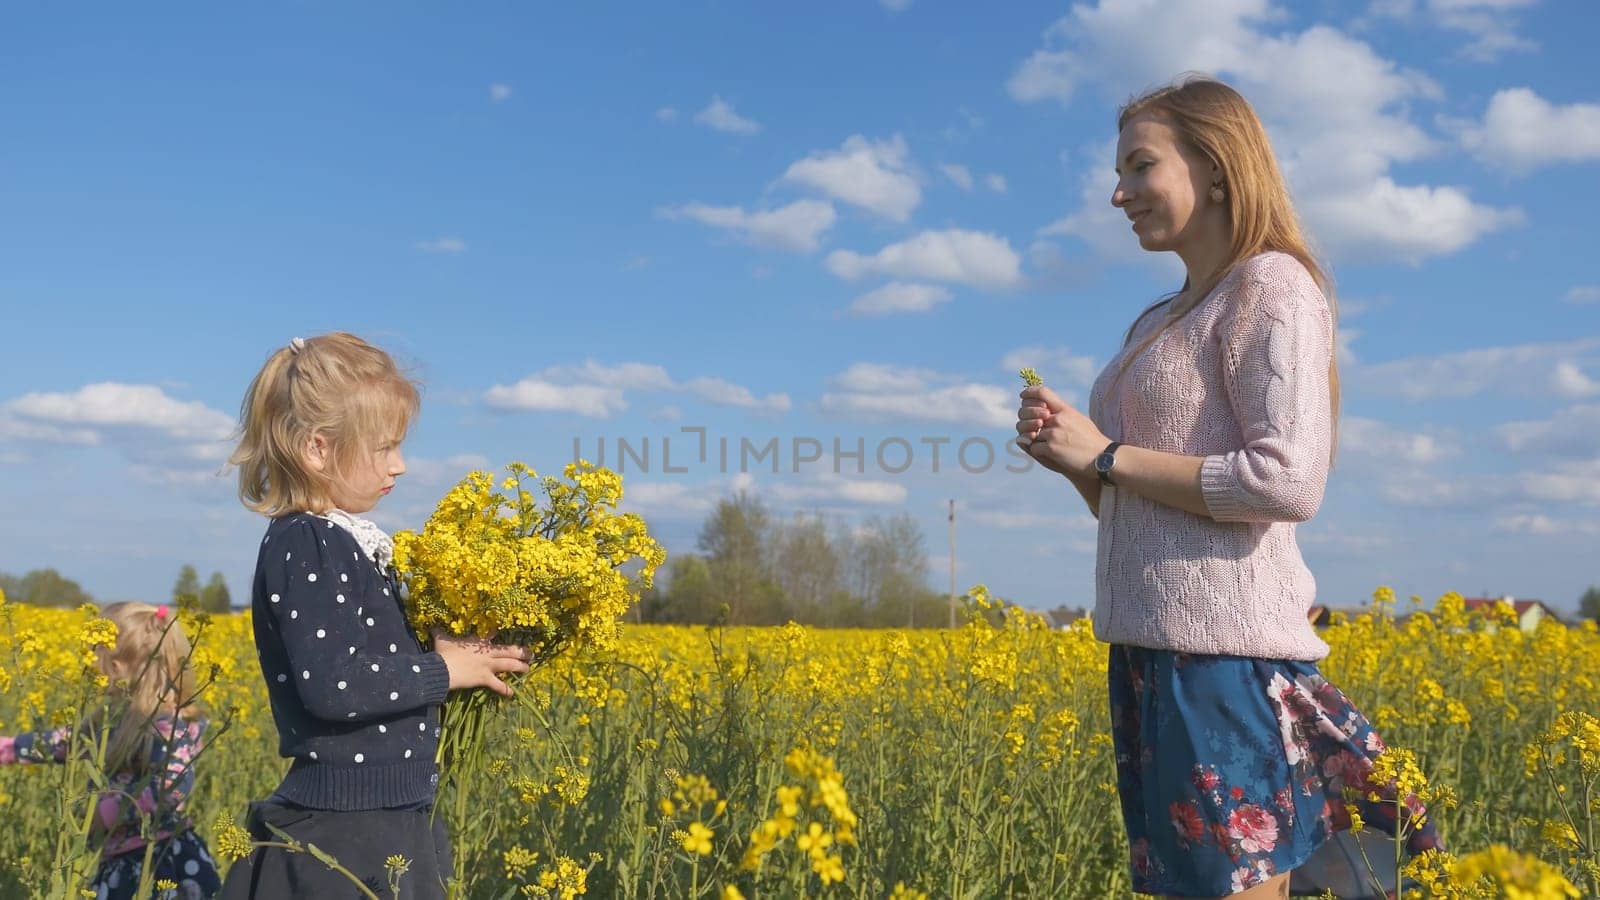 Grateful daughter gives her mother flowers in a rapeseed field